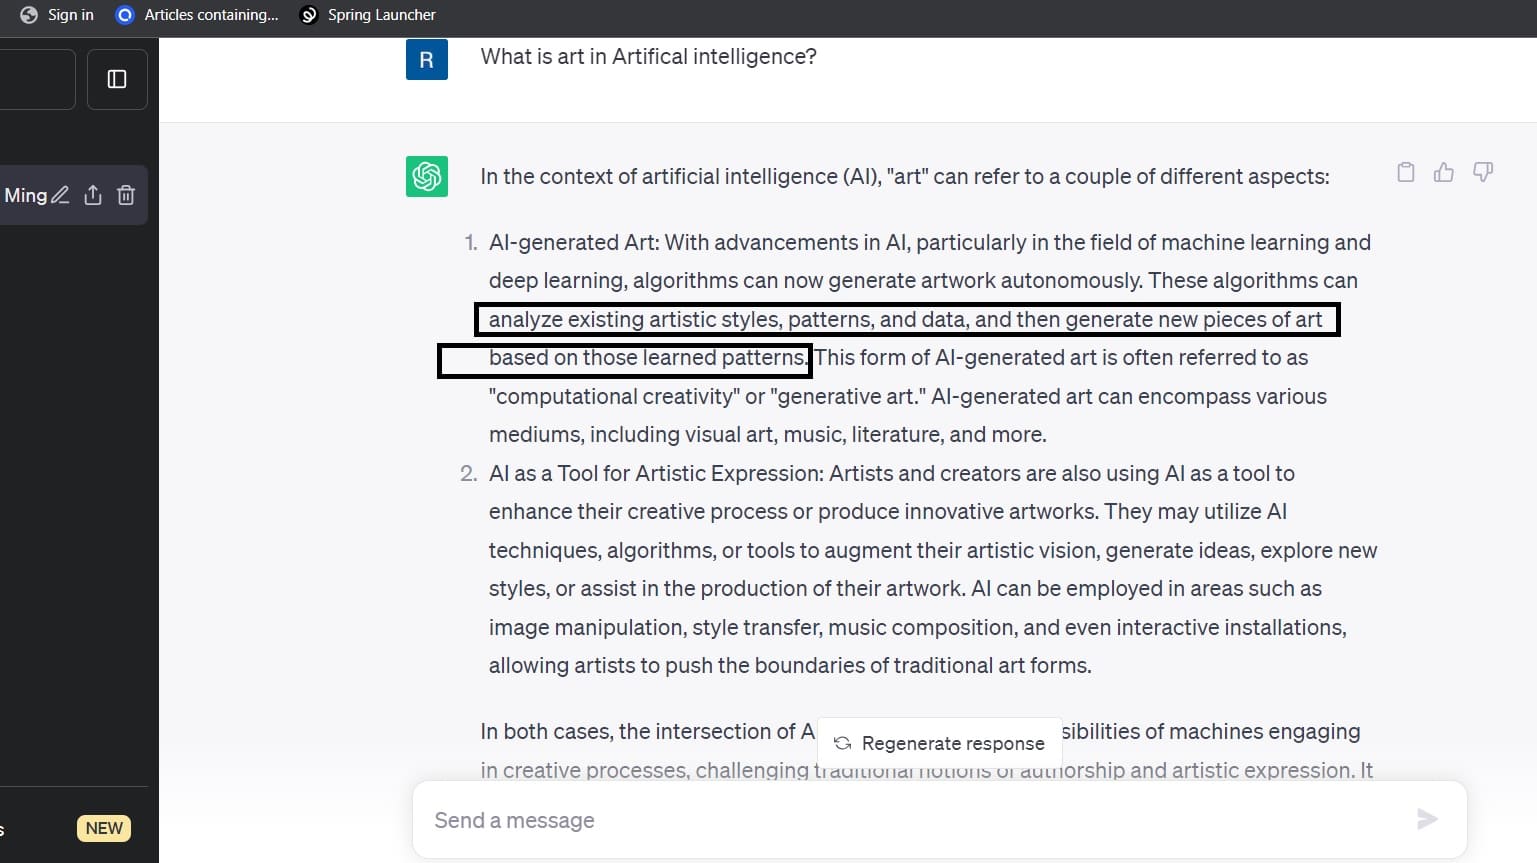 What is art in Artificial intelligence